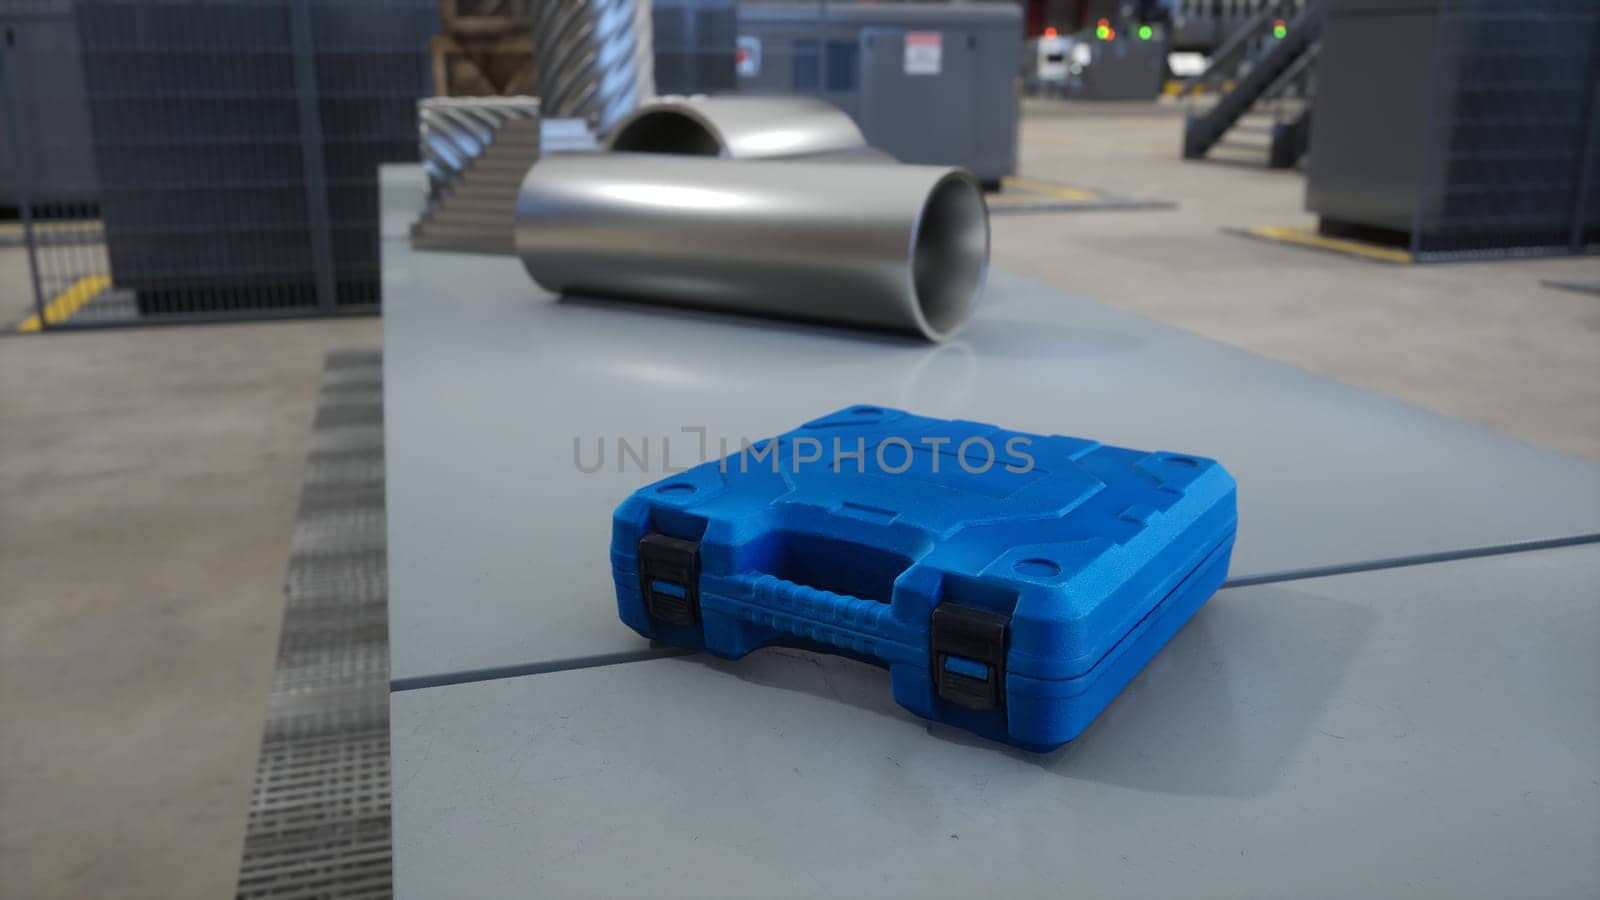 Focus on toolbox in blurry background facility used for energy efficient warehousing handling distribution and storage needs of businesses, 3D render. Close up of toolkit on workbench in logistics hub